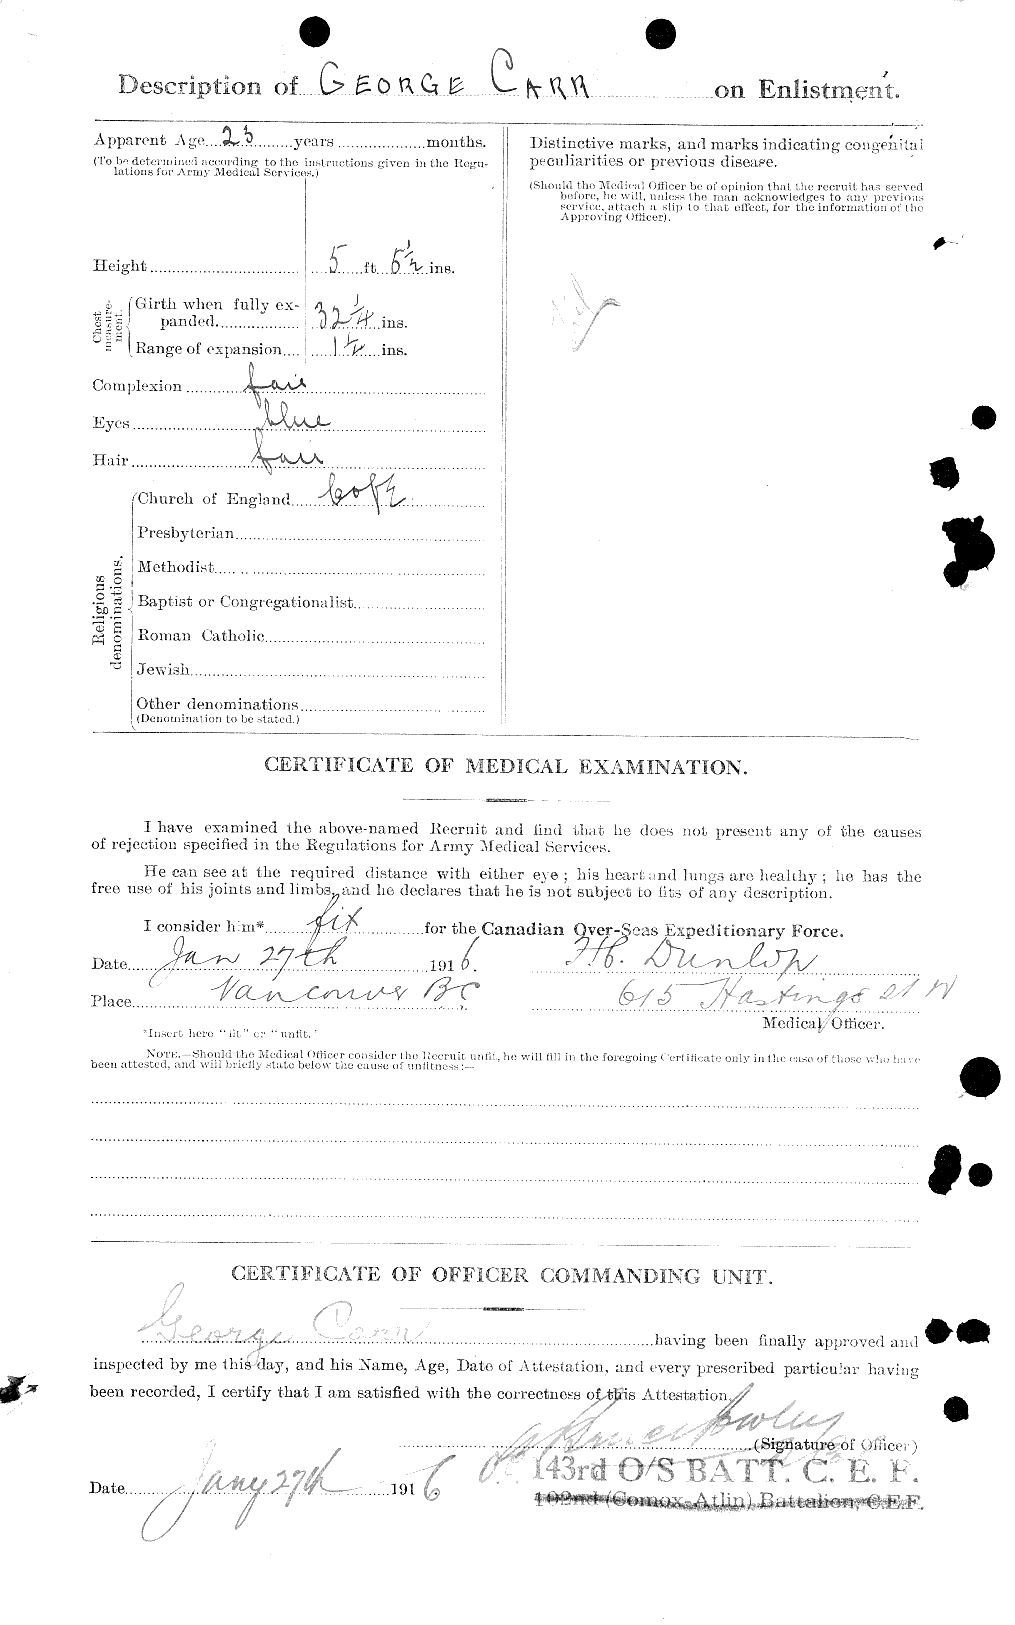 Personnel Records of the First World War - CEF 010284b